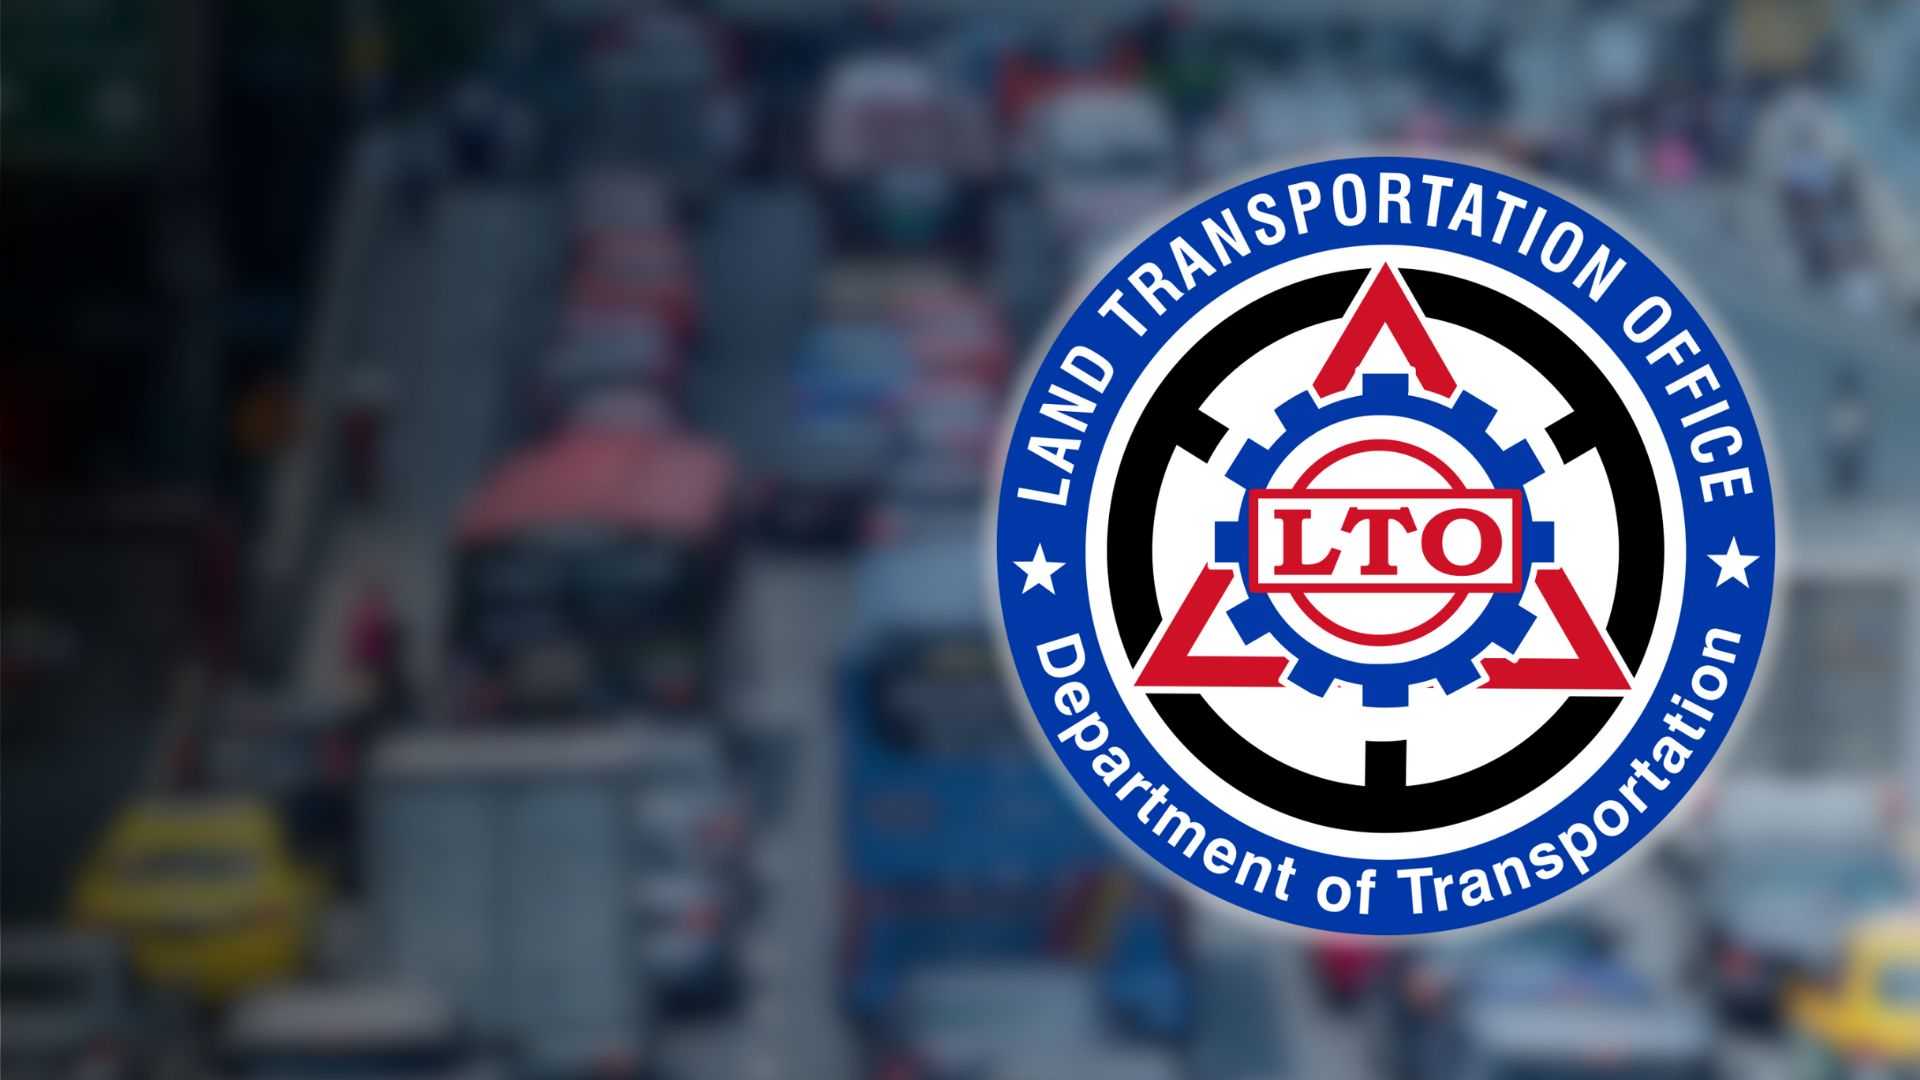 LTO: Over 270,000 delinquent vehicles registered